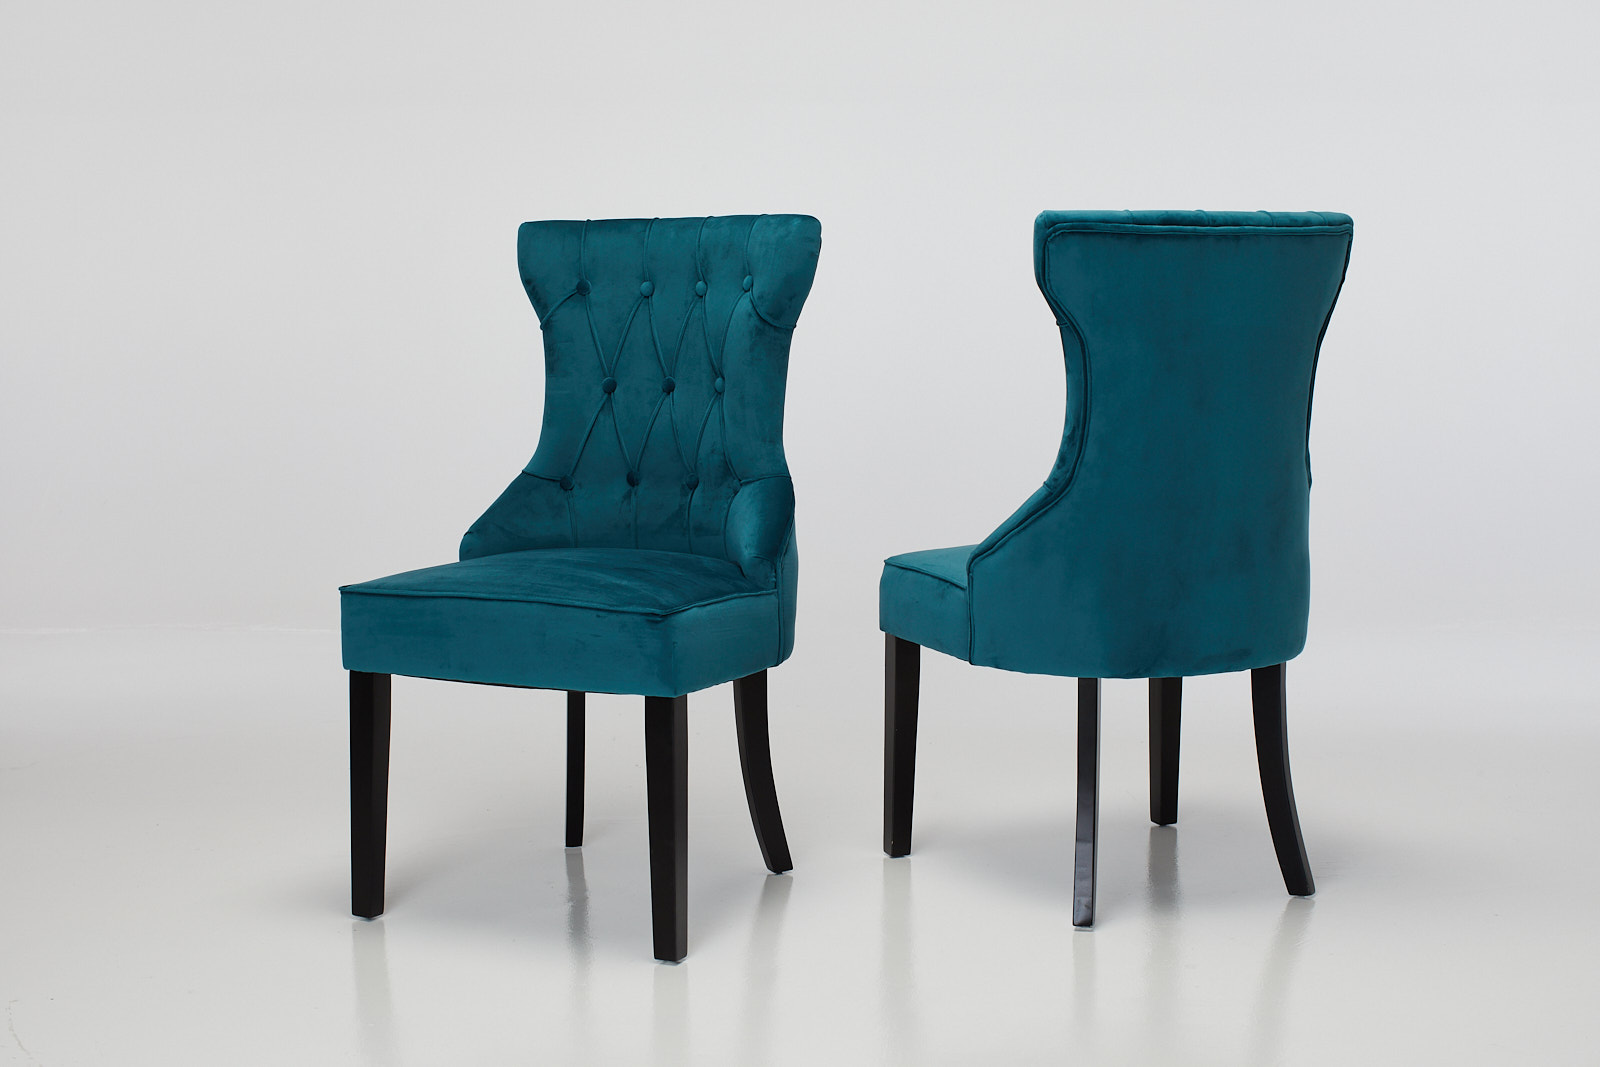 Cleo - Teal Velvet Upholstered Dining Chairs with Black Legs